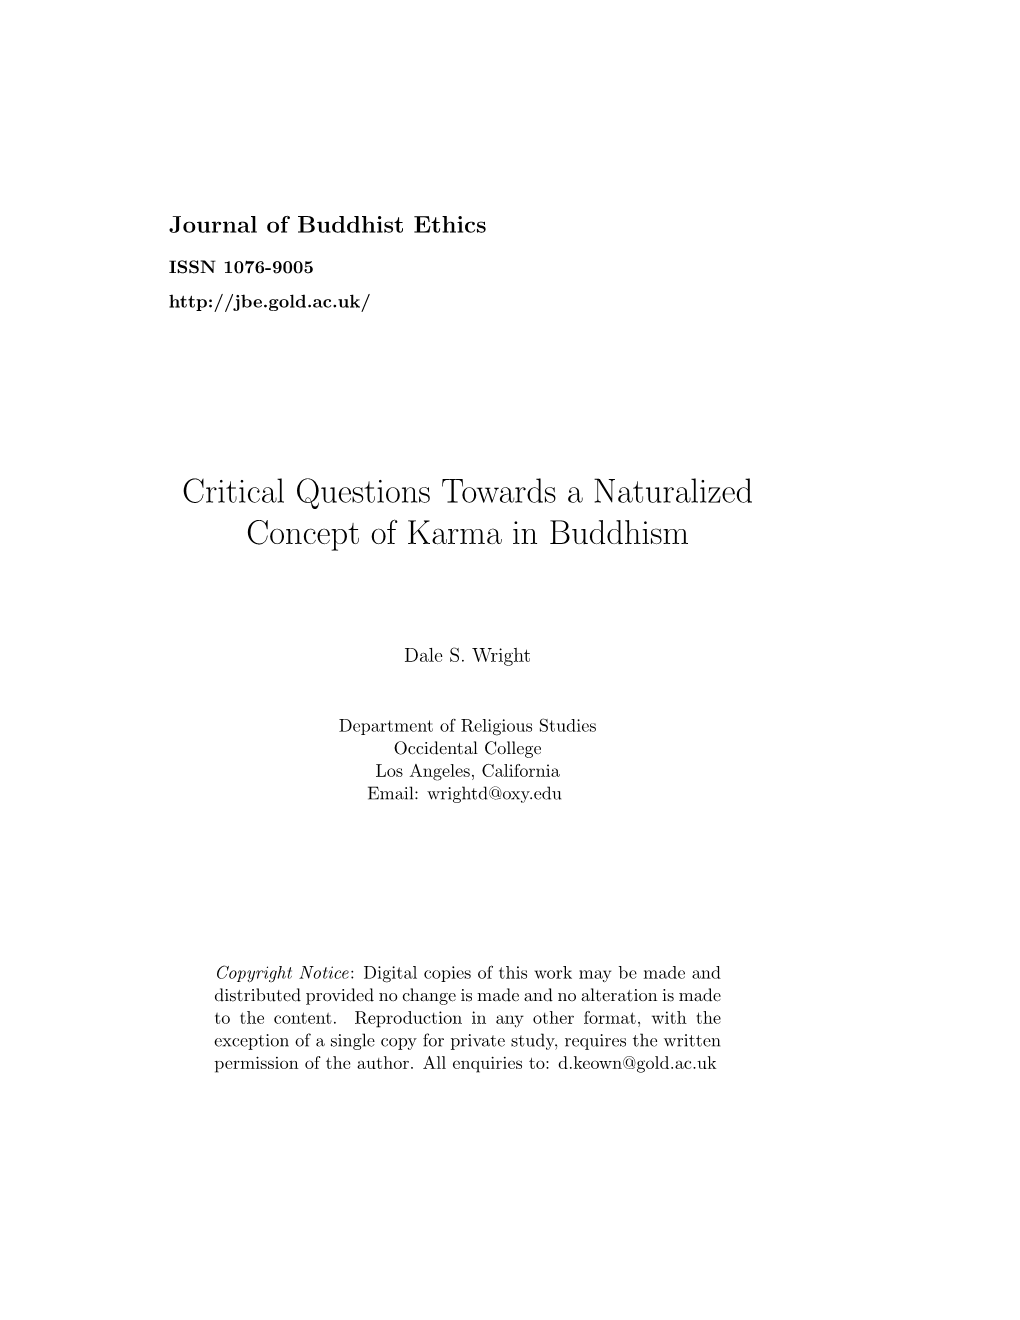 Critical Questions Towards a Naturalized Concept of Karma in Buddhism